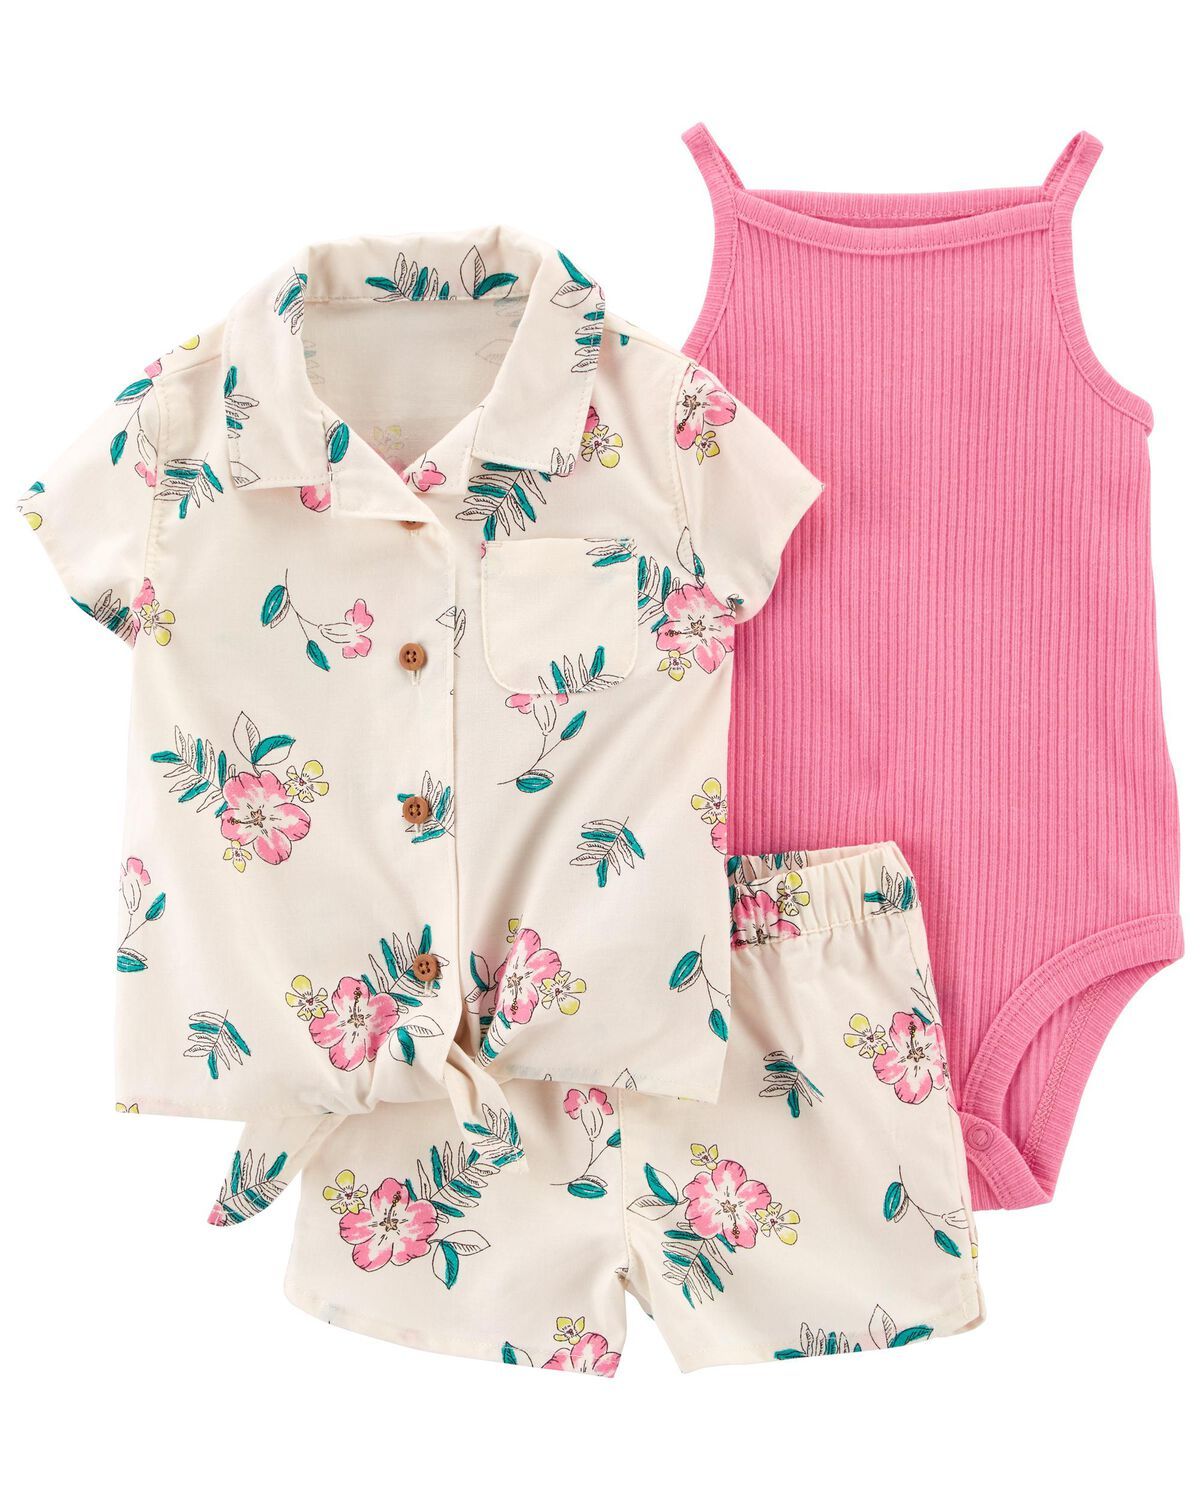 White/Pink Baby 3-Piece Floral Outfit Set | carters.com | Carter's